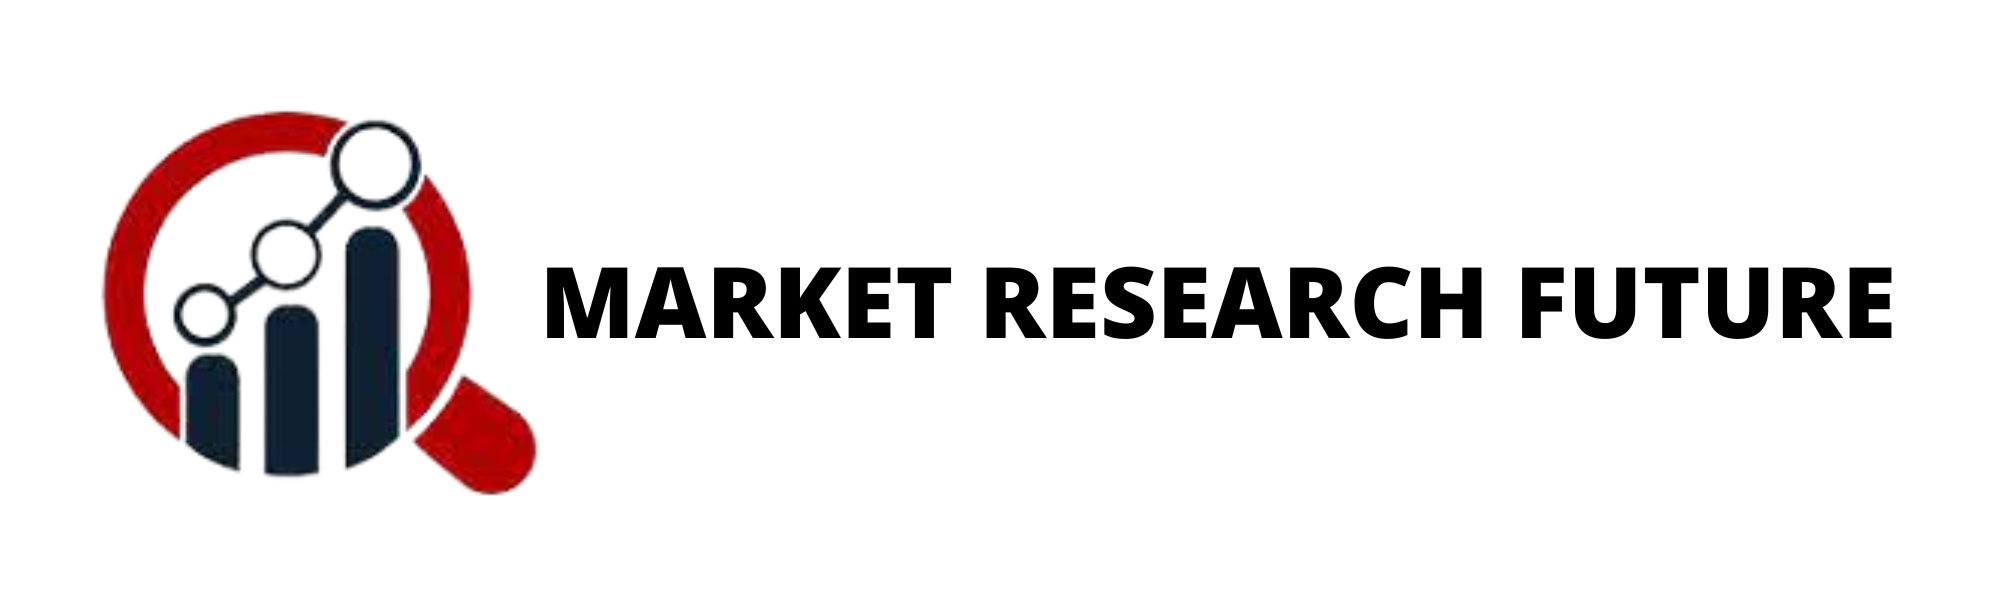 Reactive Dyes Market Demand, Global Outlook, Growth Analysis,...